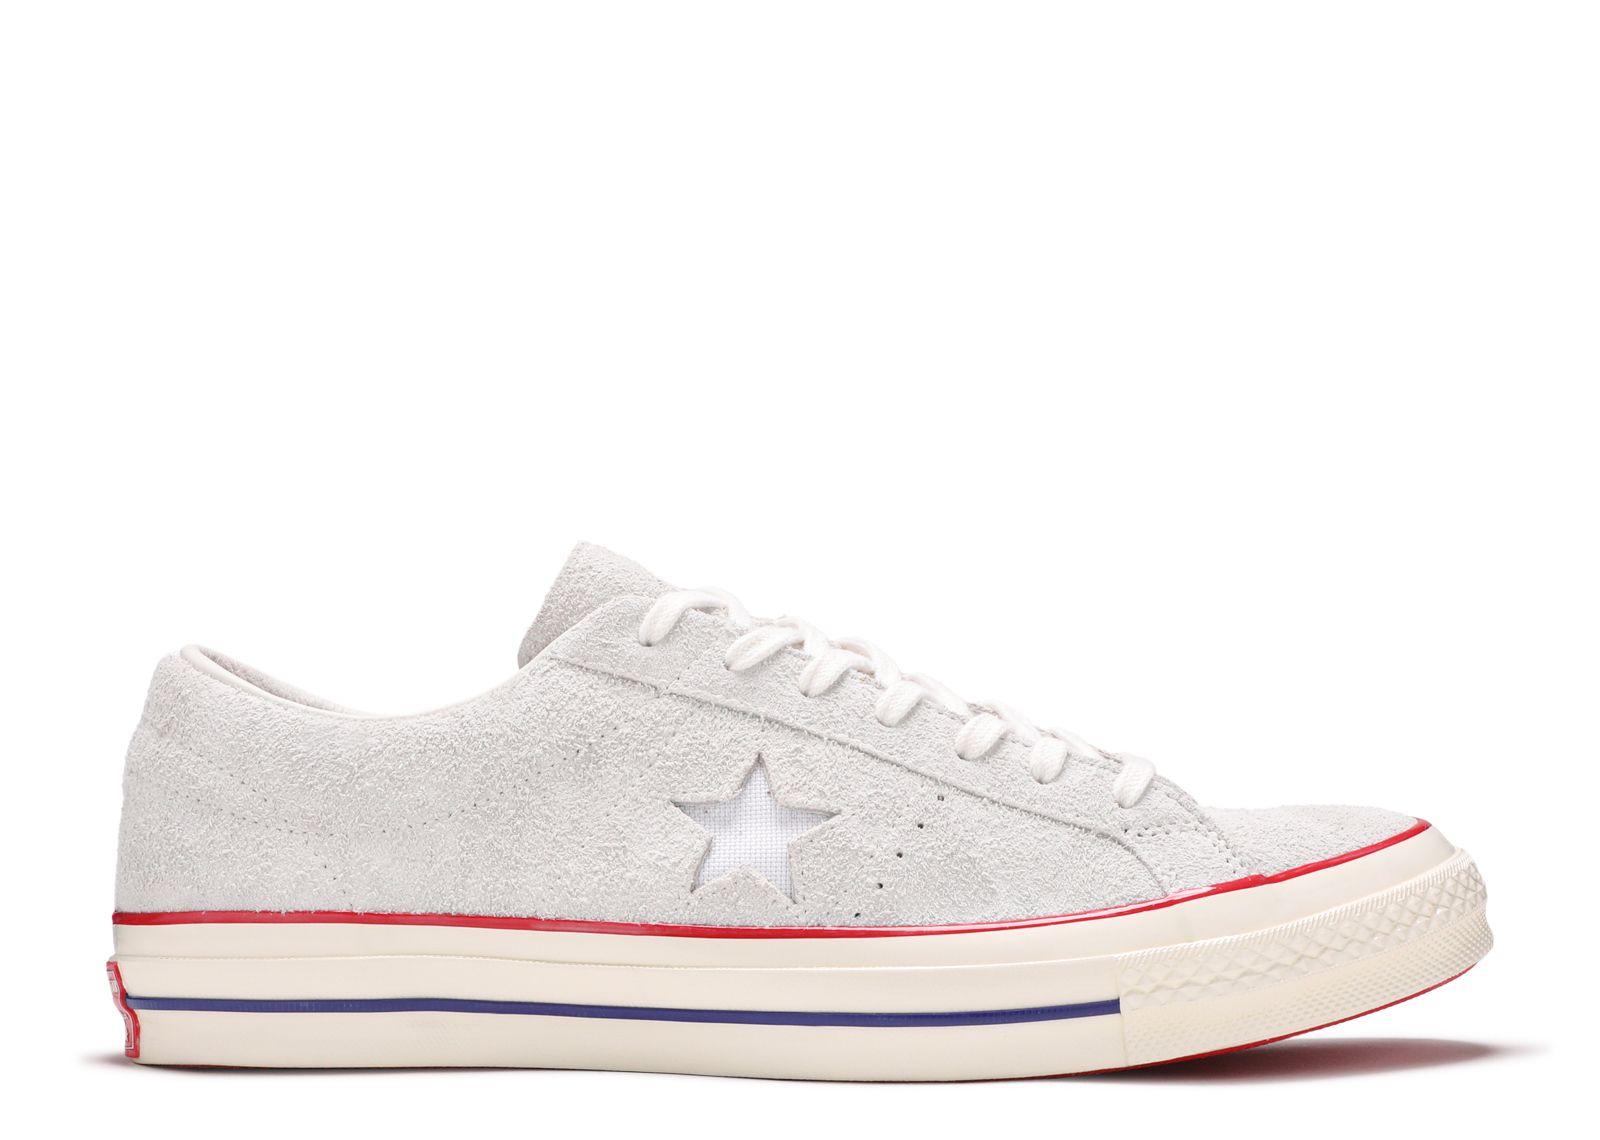 Кроссовки Converse Undefeated X One Star Suede Low 'White', белый кеды converse one star pro suede low